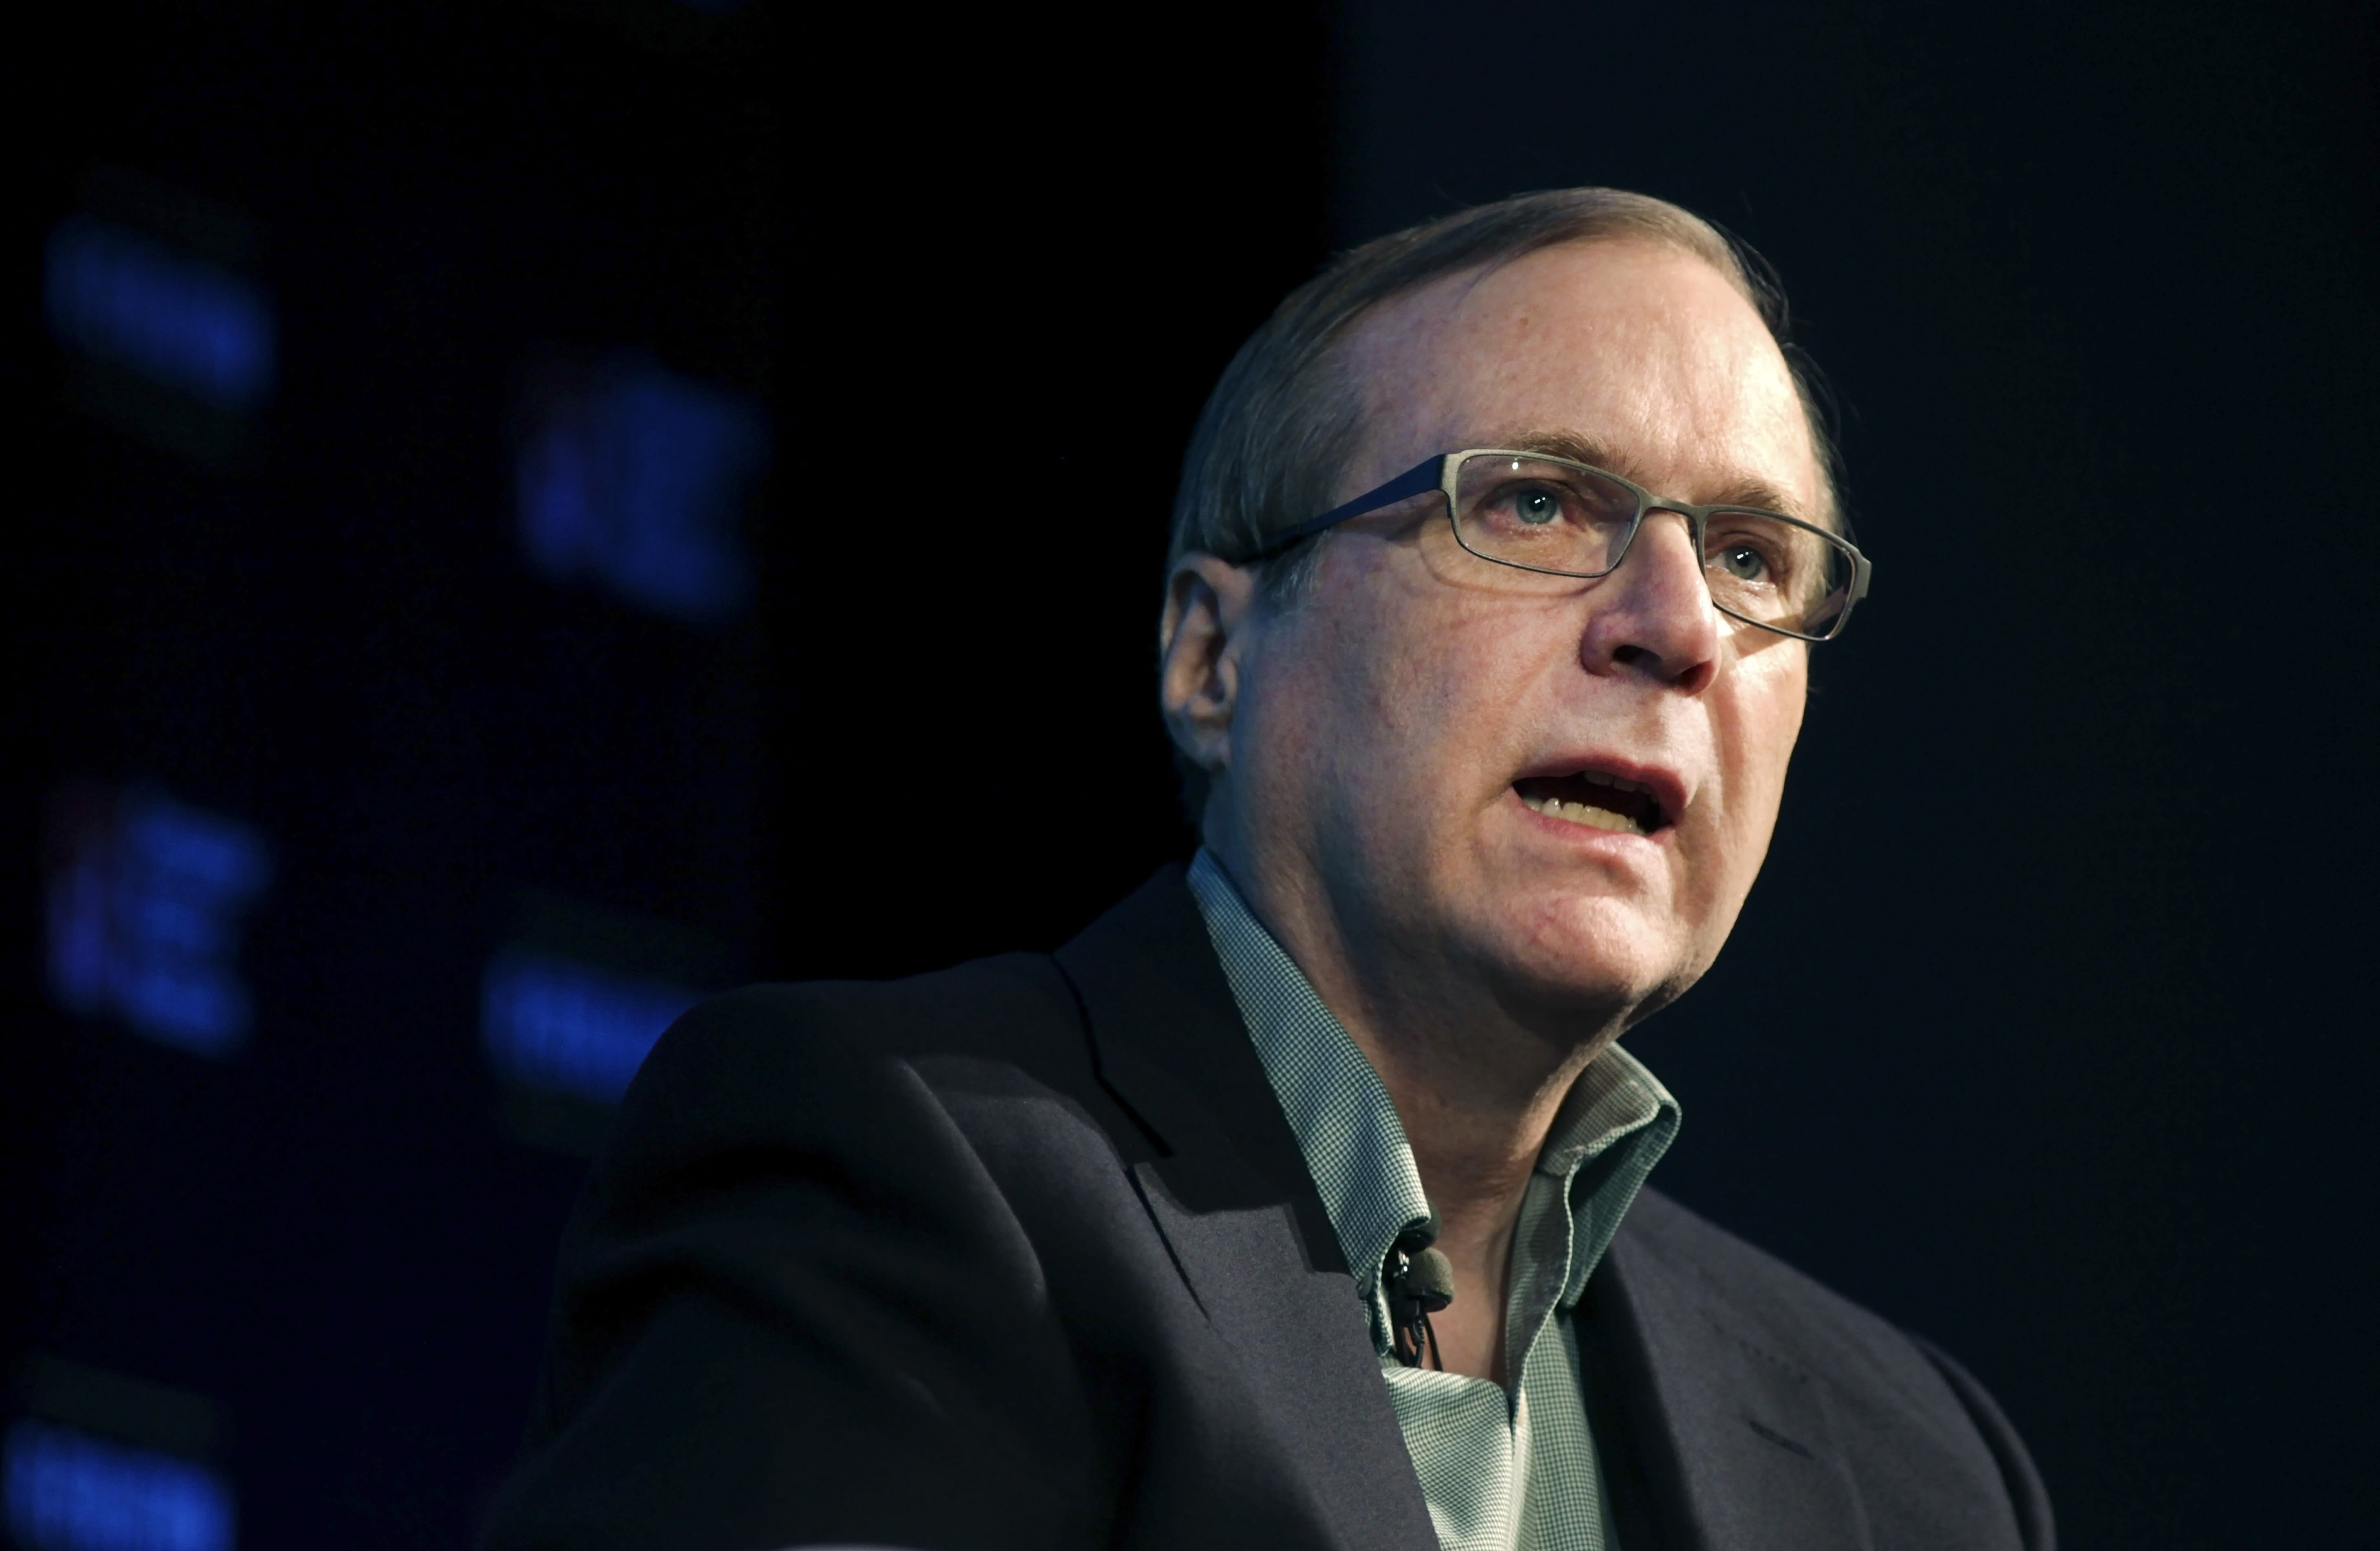 Microsoft CoFounder Paul Allen Says His Cancer Has Returned, Expresses